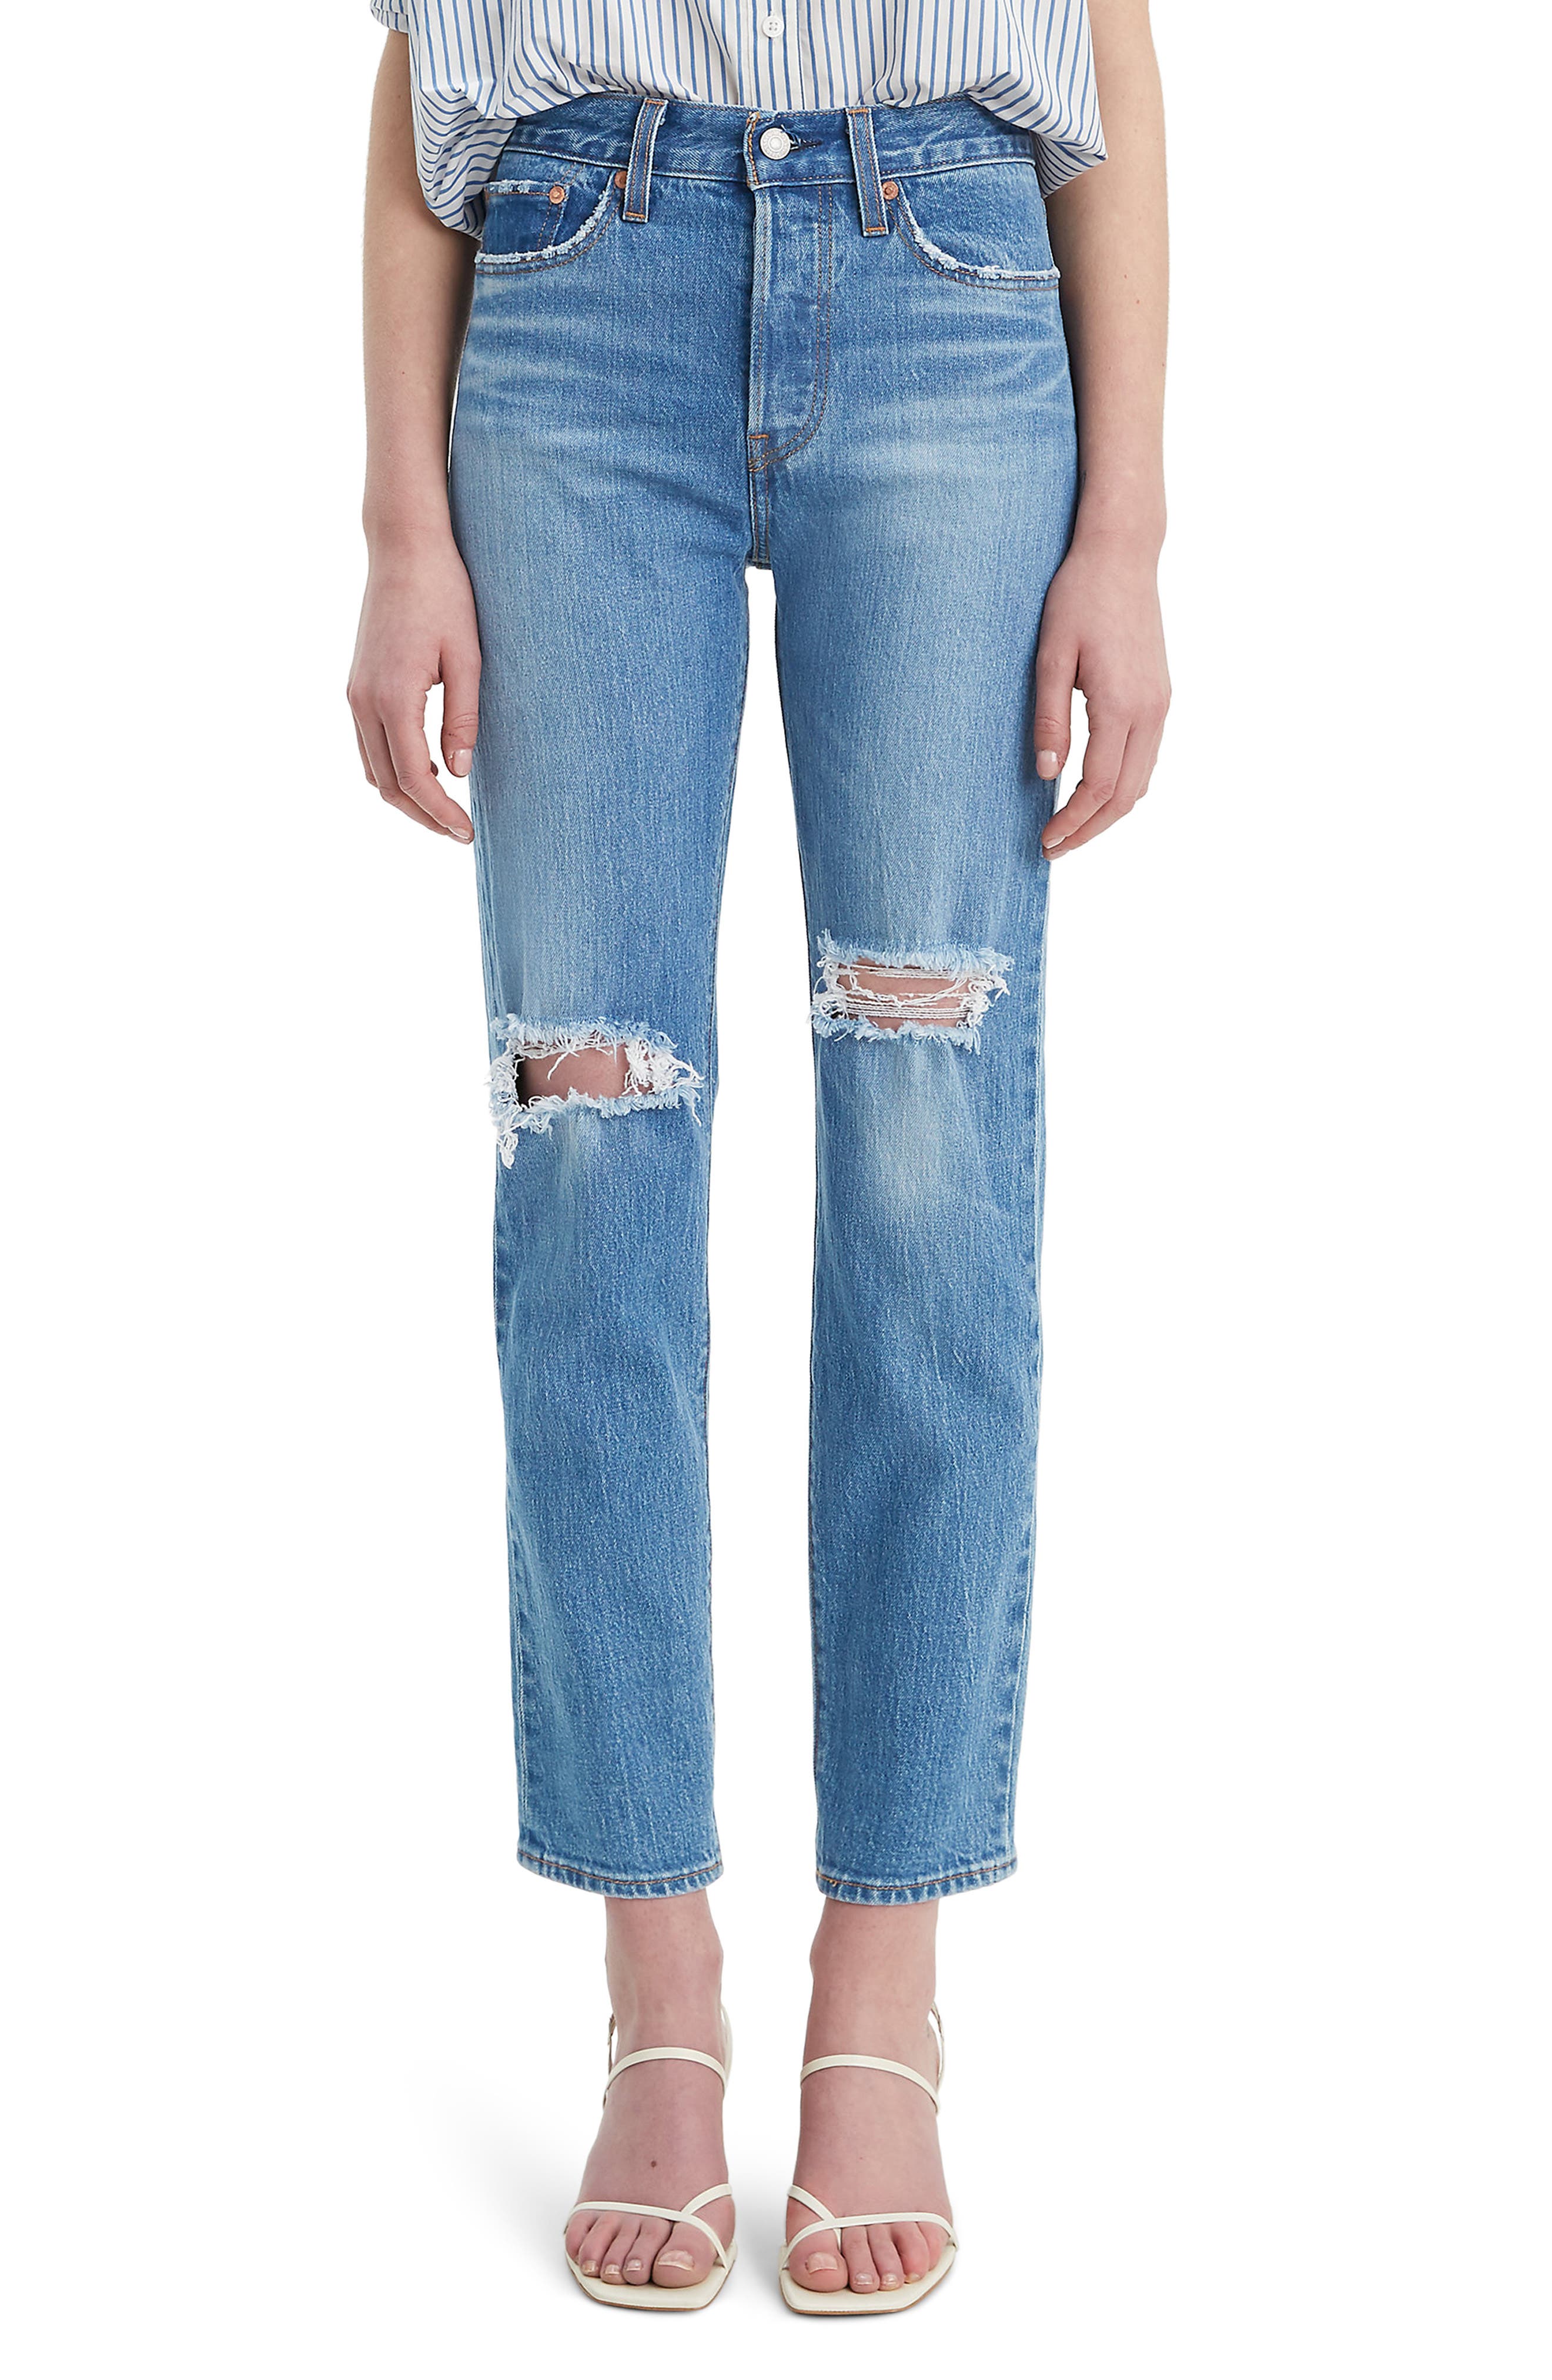 levi's straight cut wedgie jeans